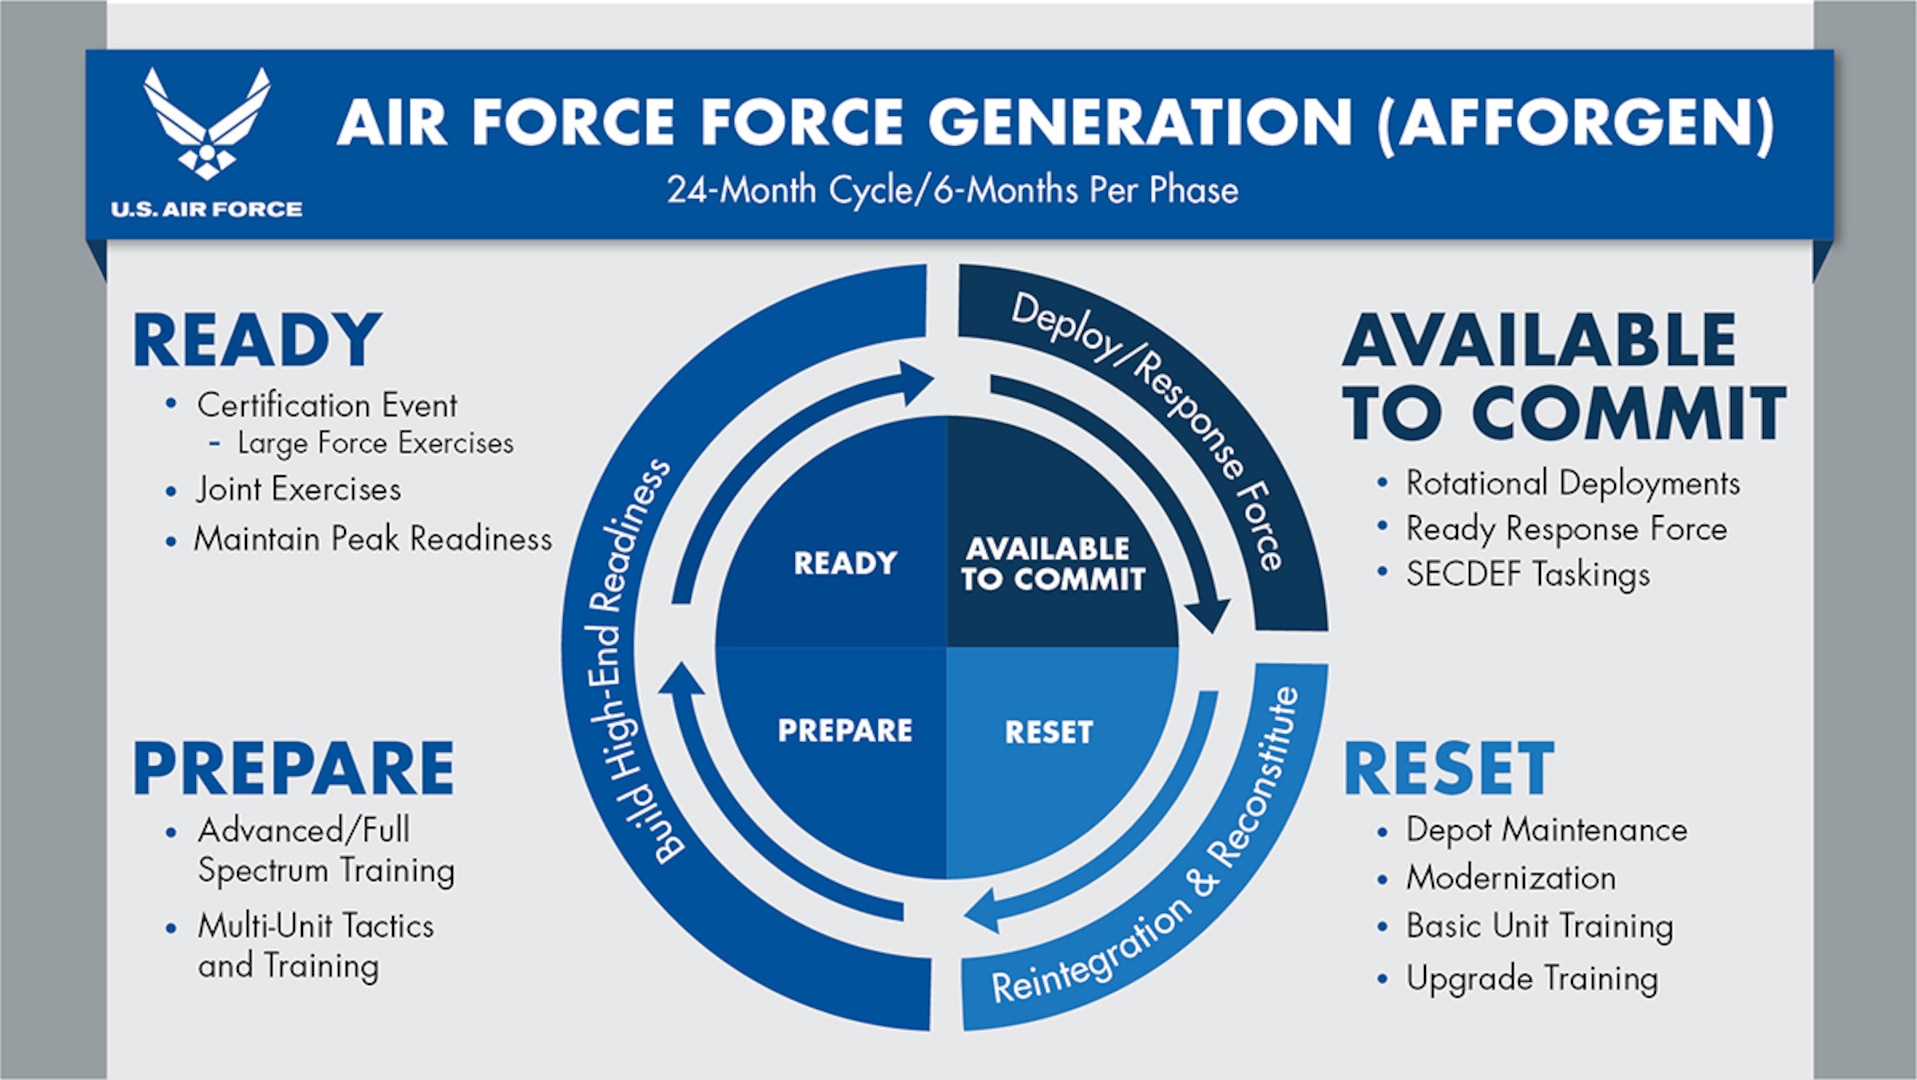 The Air Force has announced its plans to replace the Air Expeditionary Force deployment model with the Air Force Generation model. The graphic shown outlines the four phases that will cover a 24-month period. AFFORGEN, model ensures a sustainable force offering of Airmen and airpower to the Joint Force. (U.S. Air Force graphic)